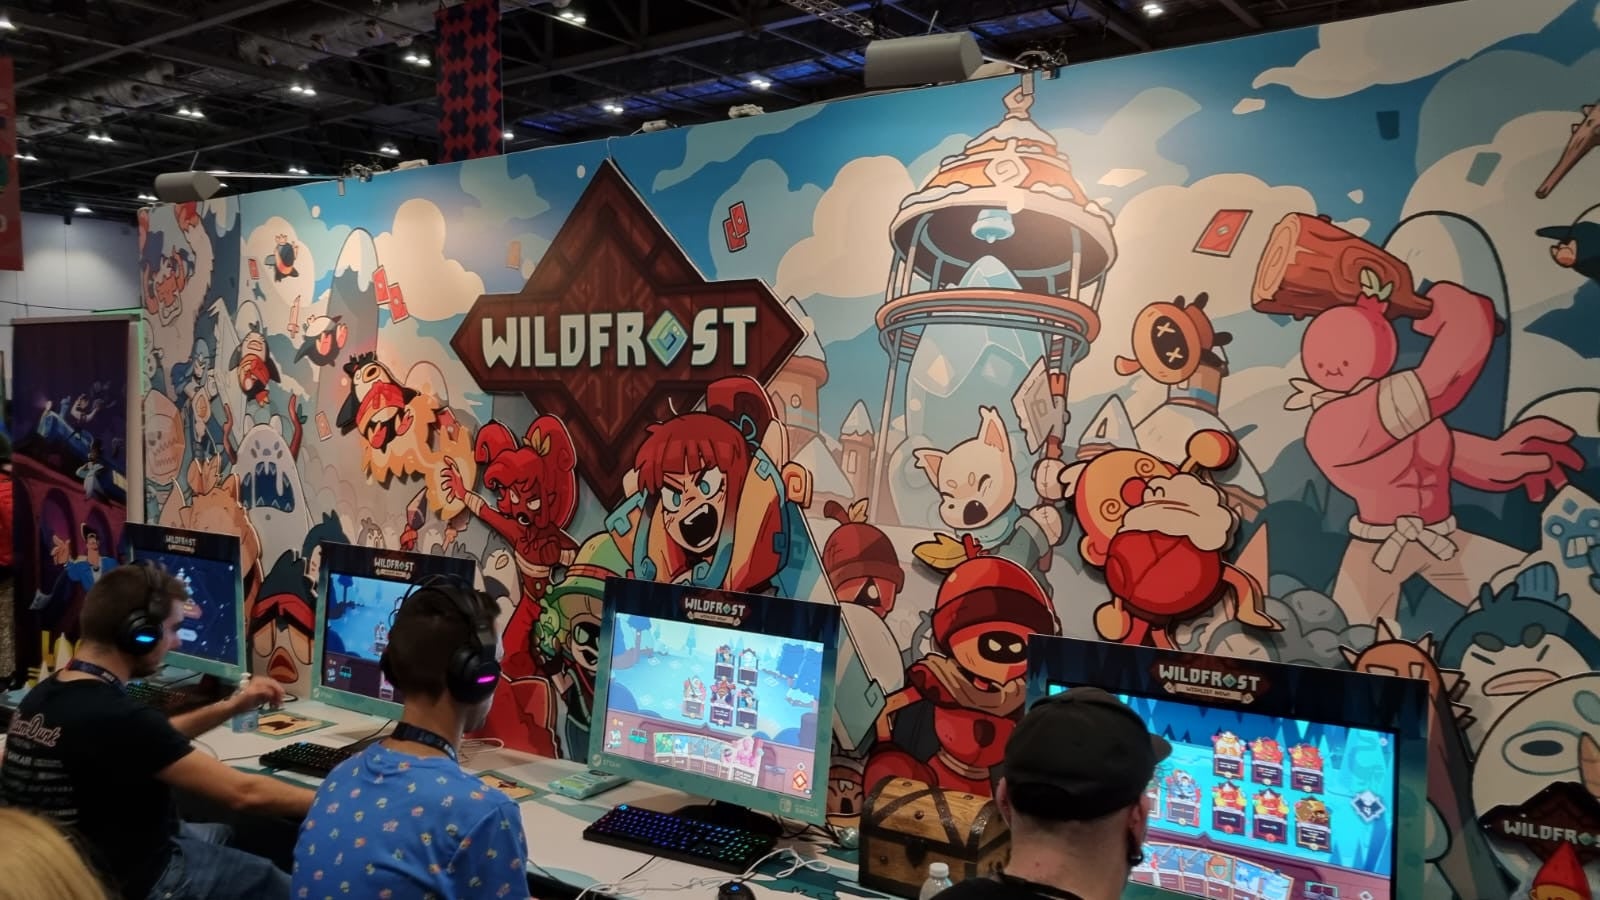 The Wildfrost booth at EGX 2022.